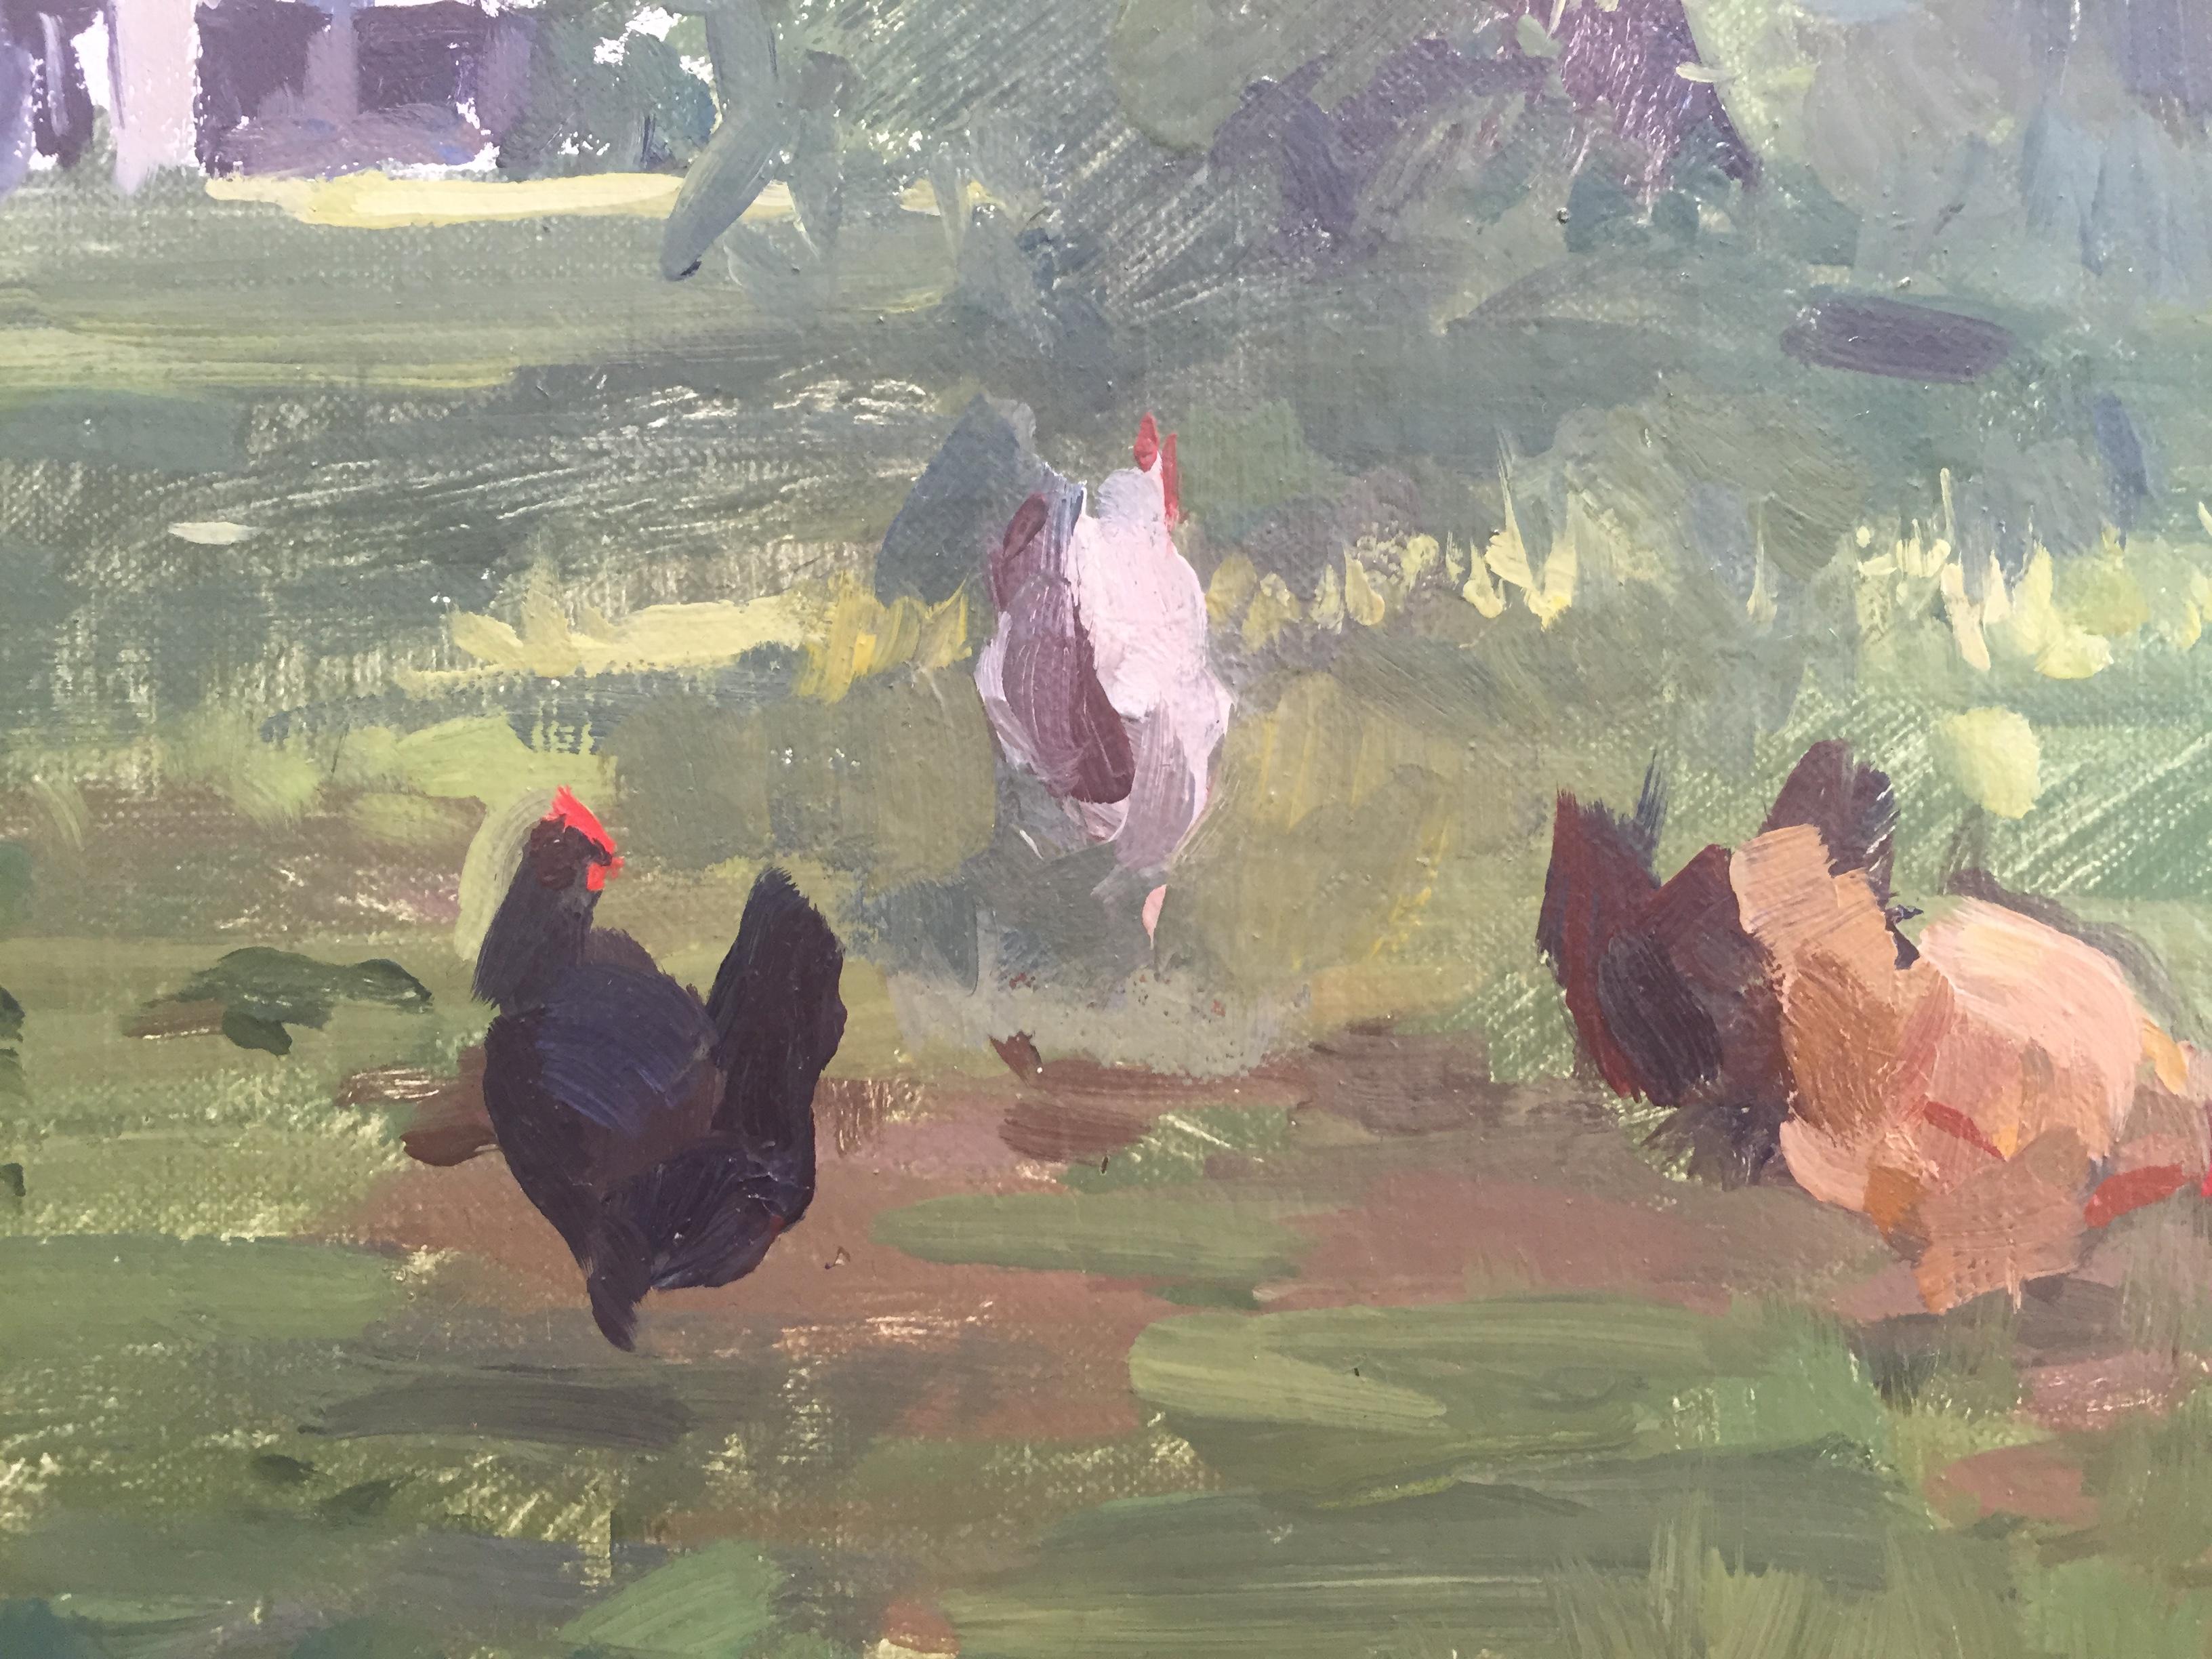 Painted en plein air, a group of chickens poke around a grassy yard. 

Frame options available. 

Marc Dalessio was born in 1972 in Los Angeles, California. Even in his earliest years, it was evident that his passion was art. In 1989 he started at